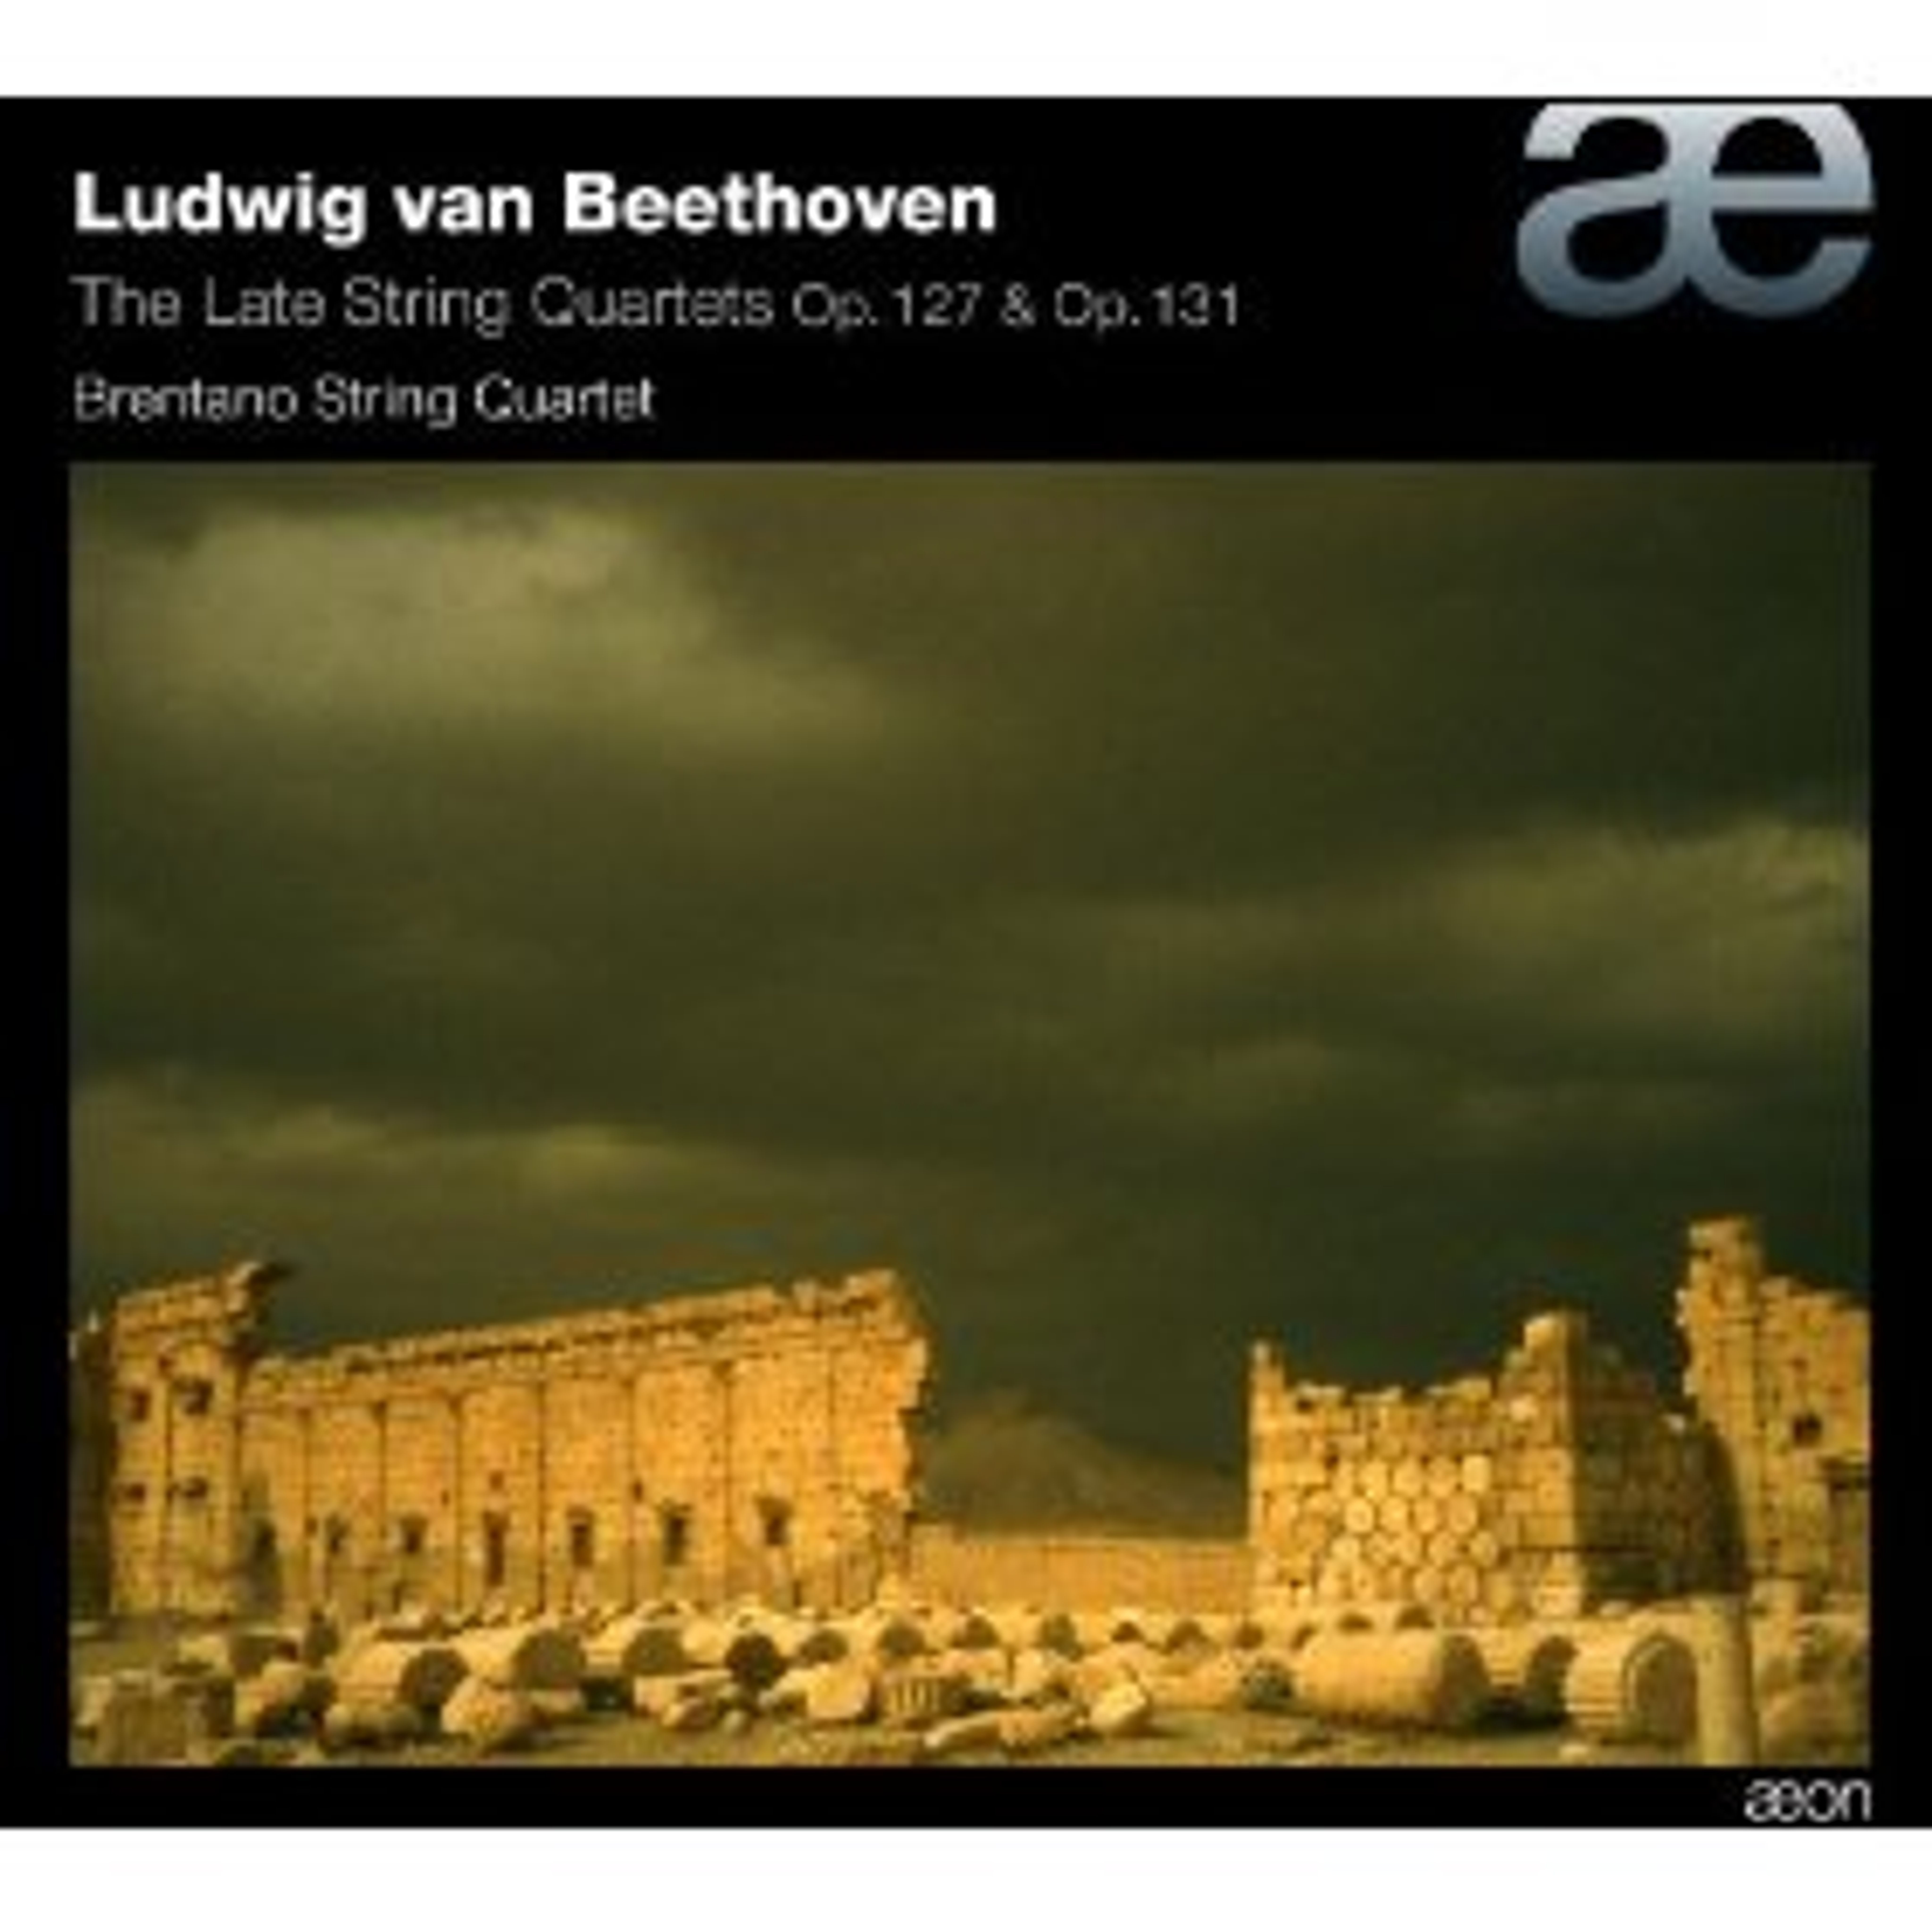 cover image of the recording Beethoven: The Late String Quartets Op. 127 and 131